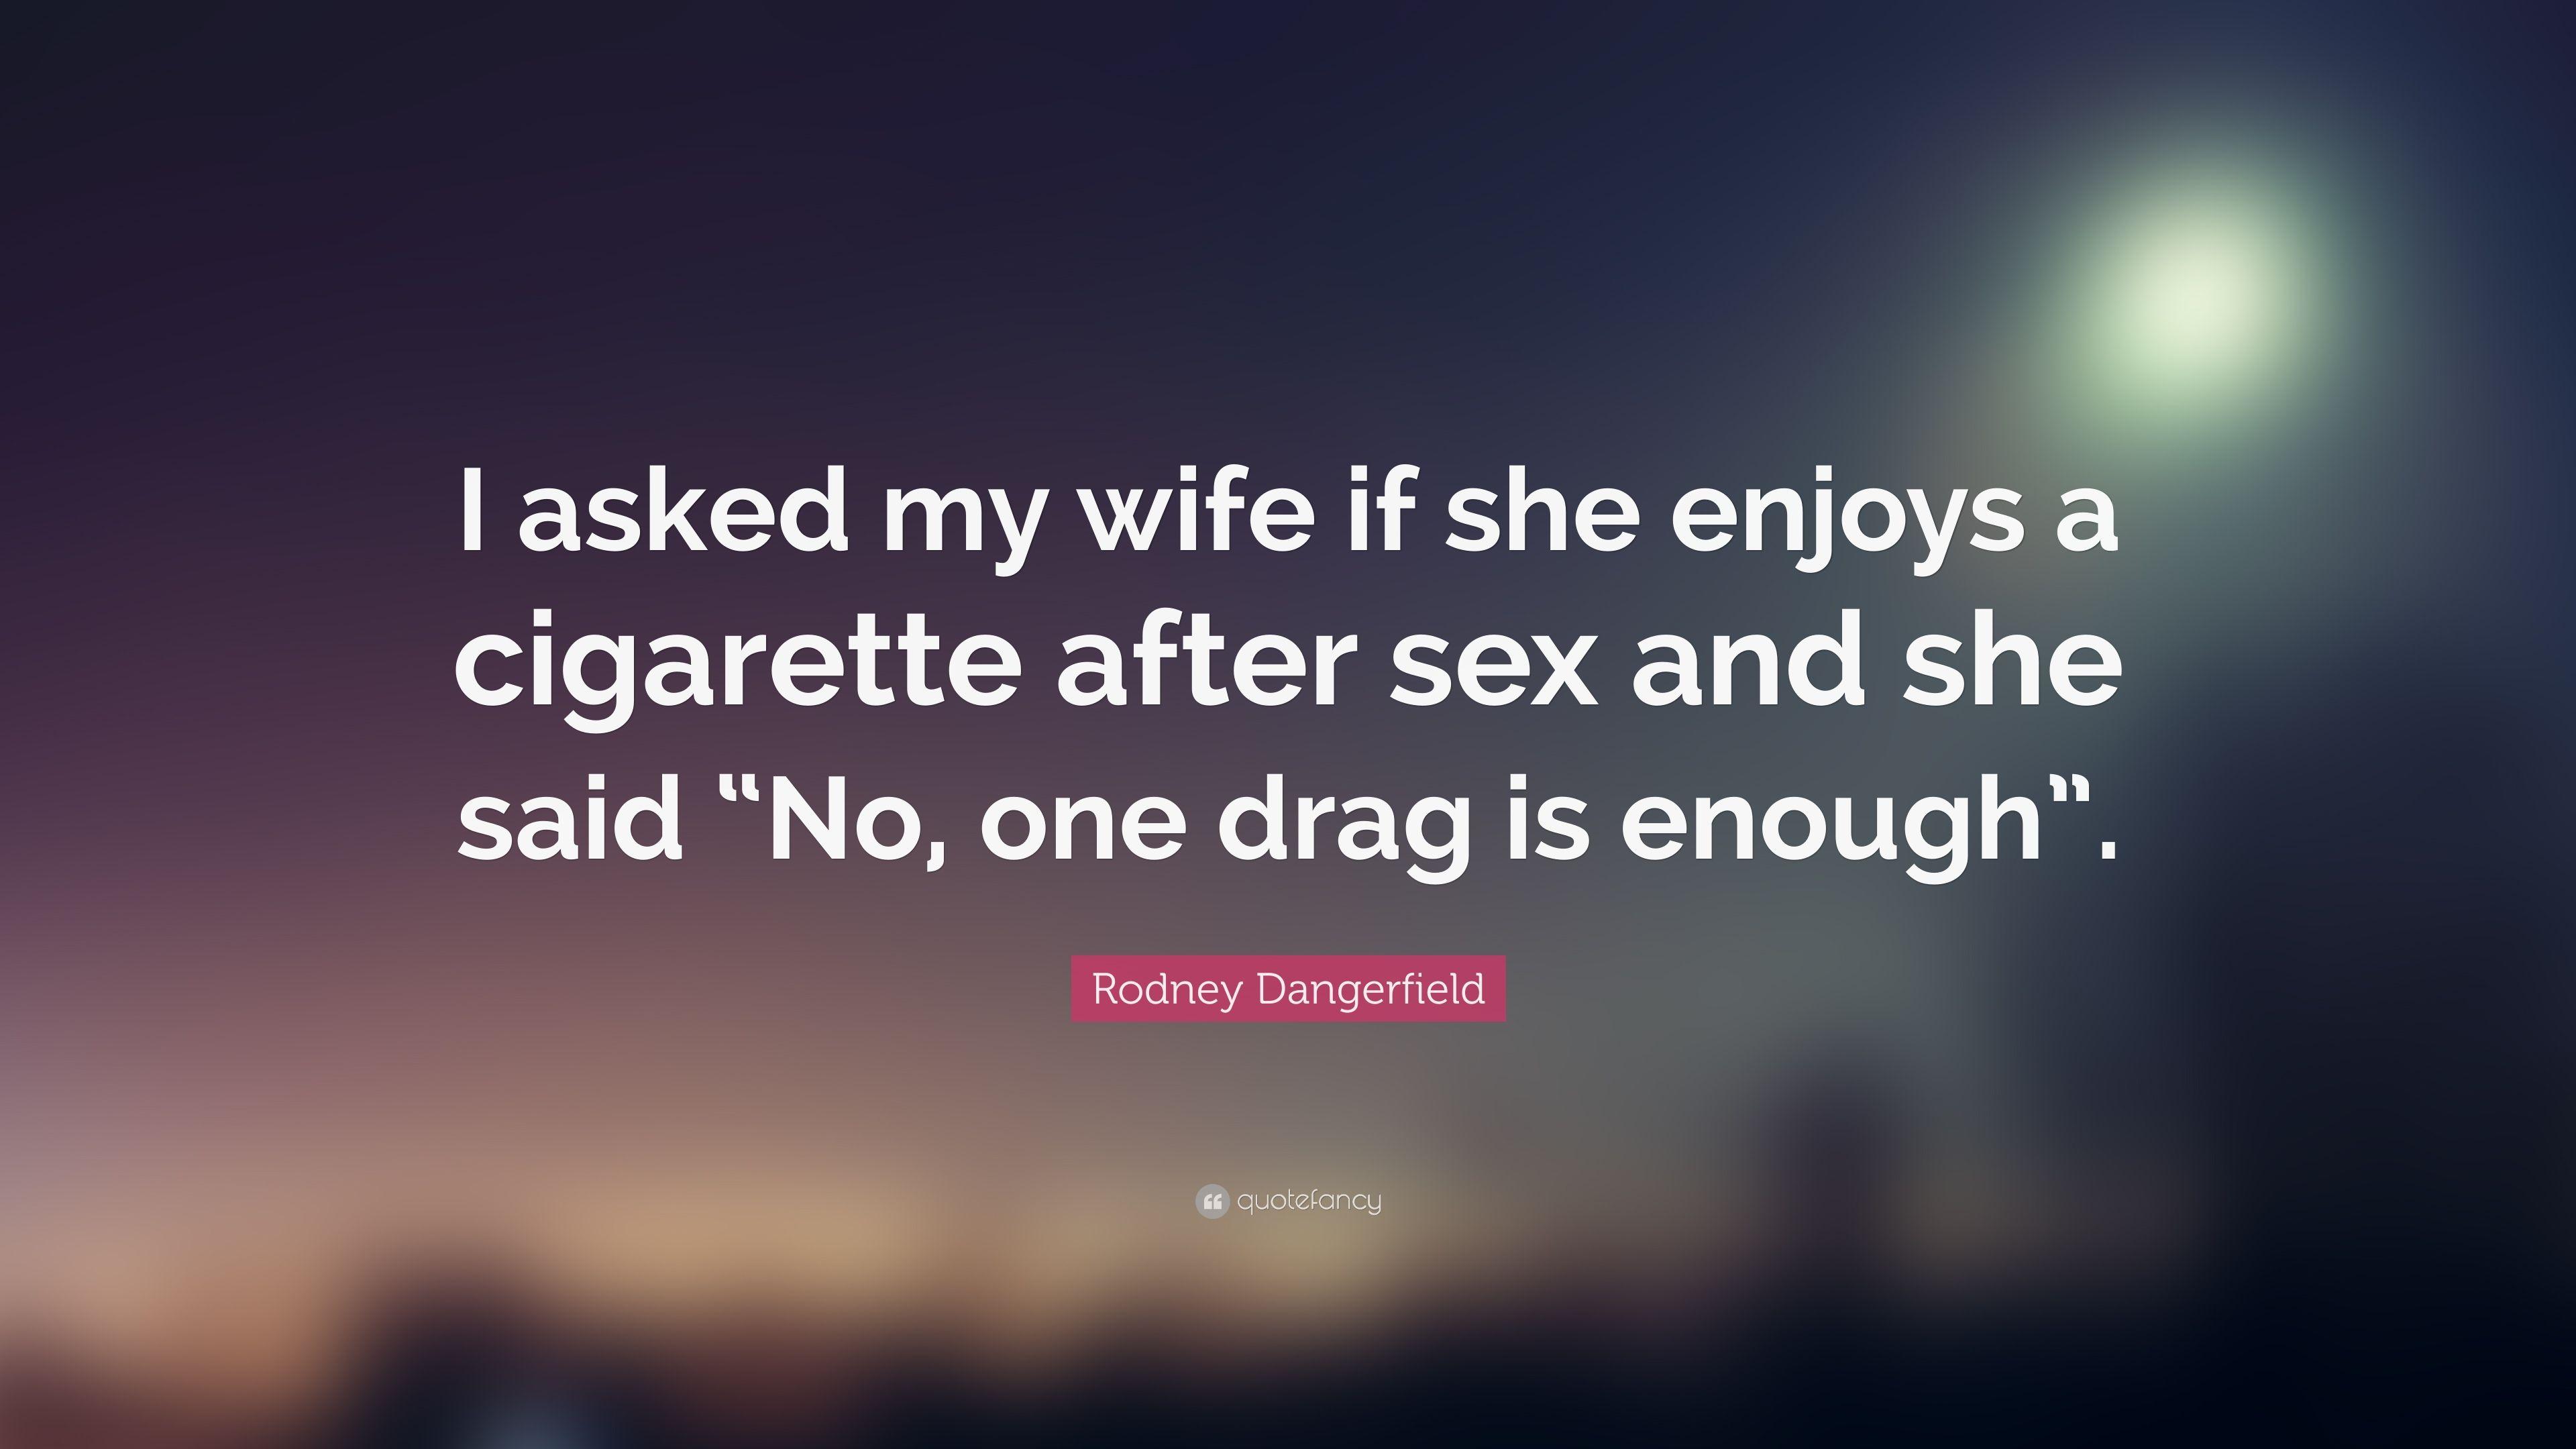 Rodney Dangerfield Quote: “I asked my wife if she enjoys a cigarette